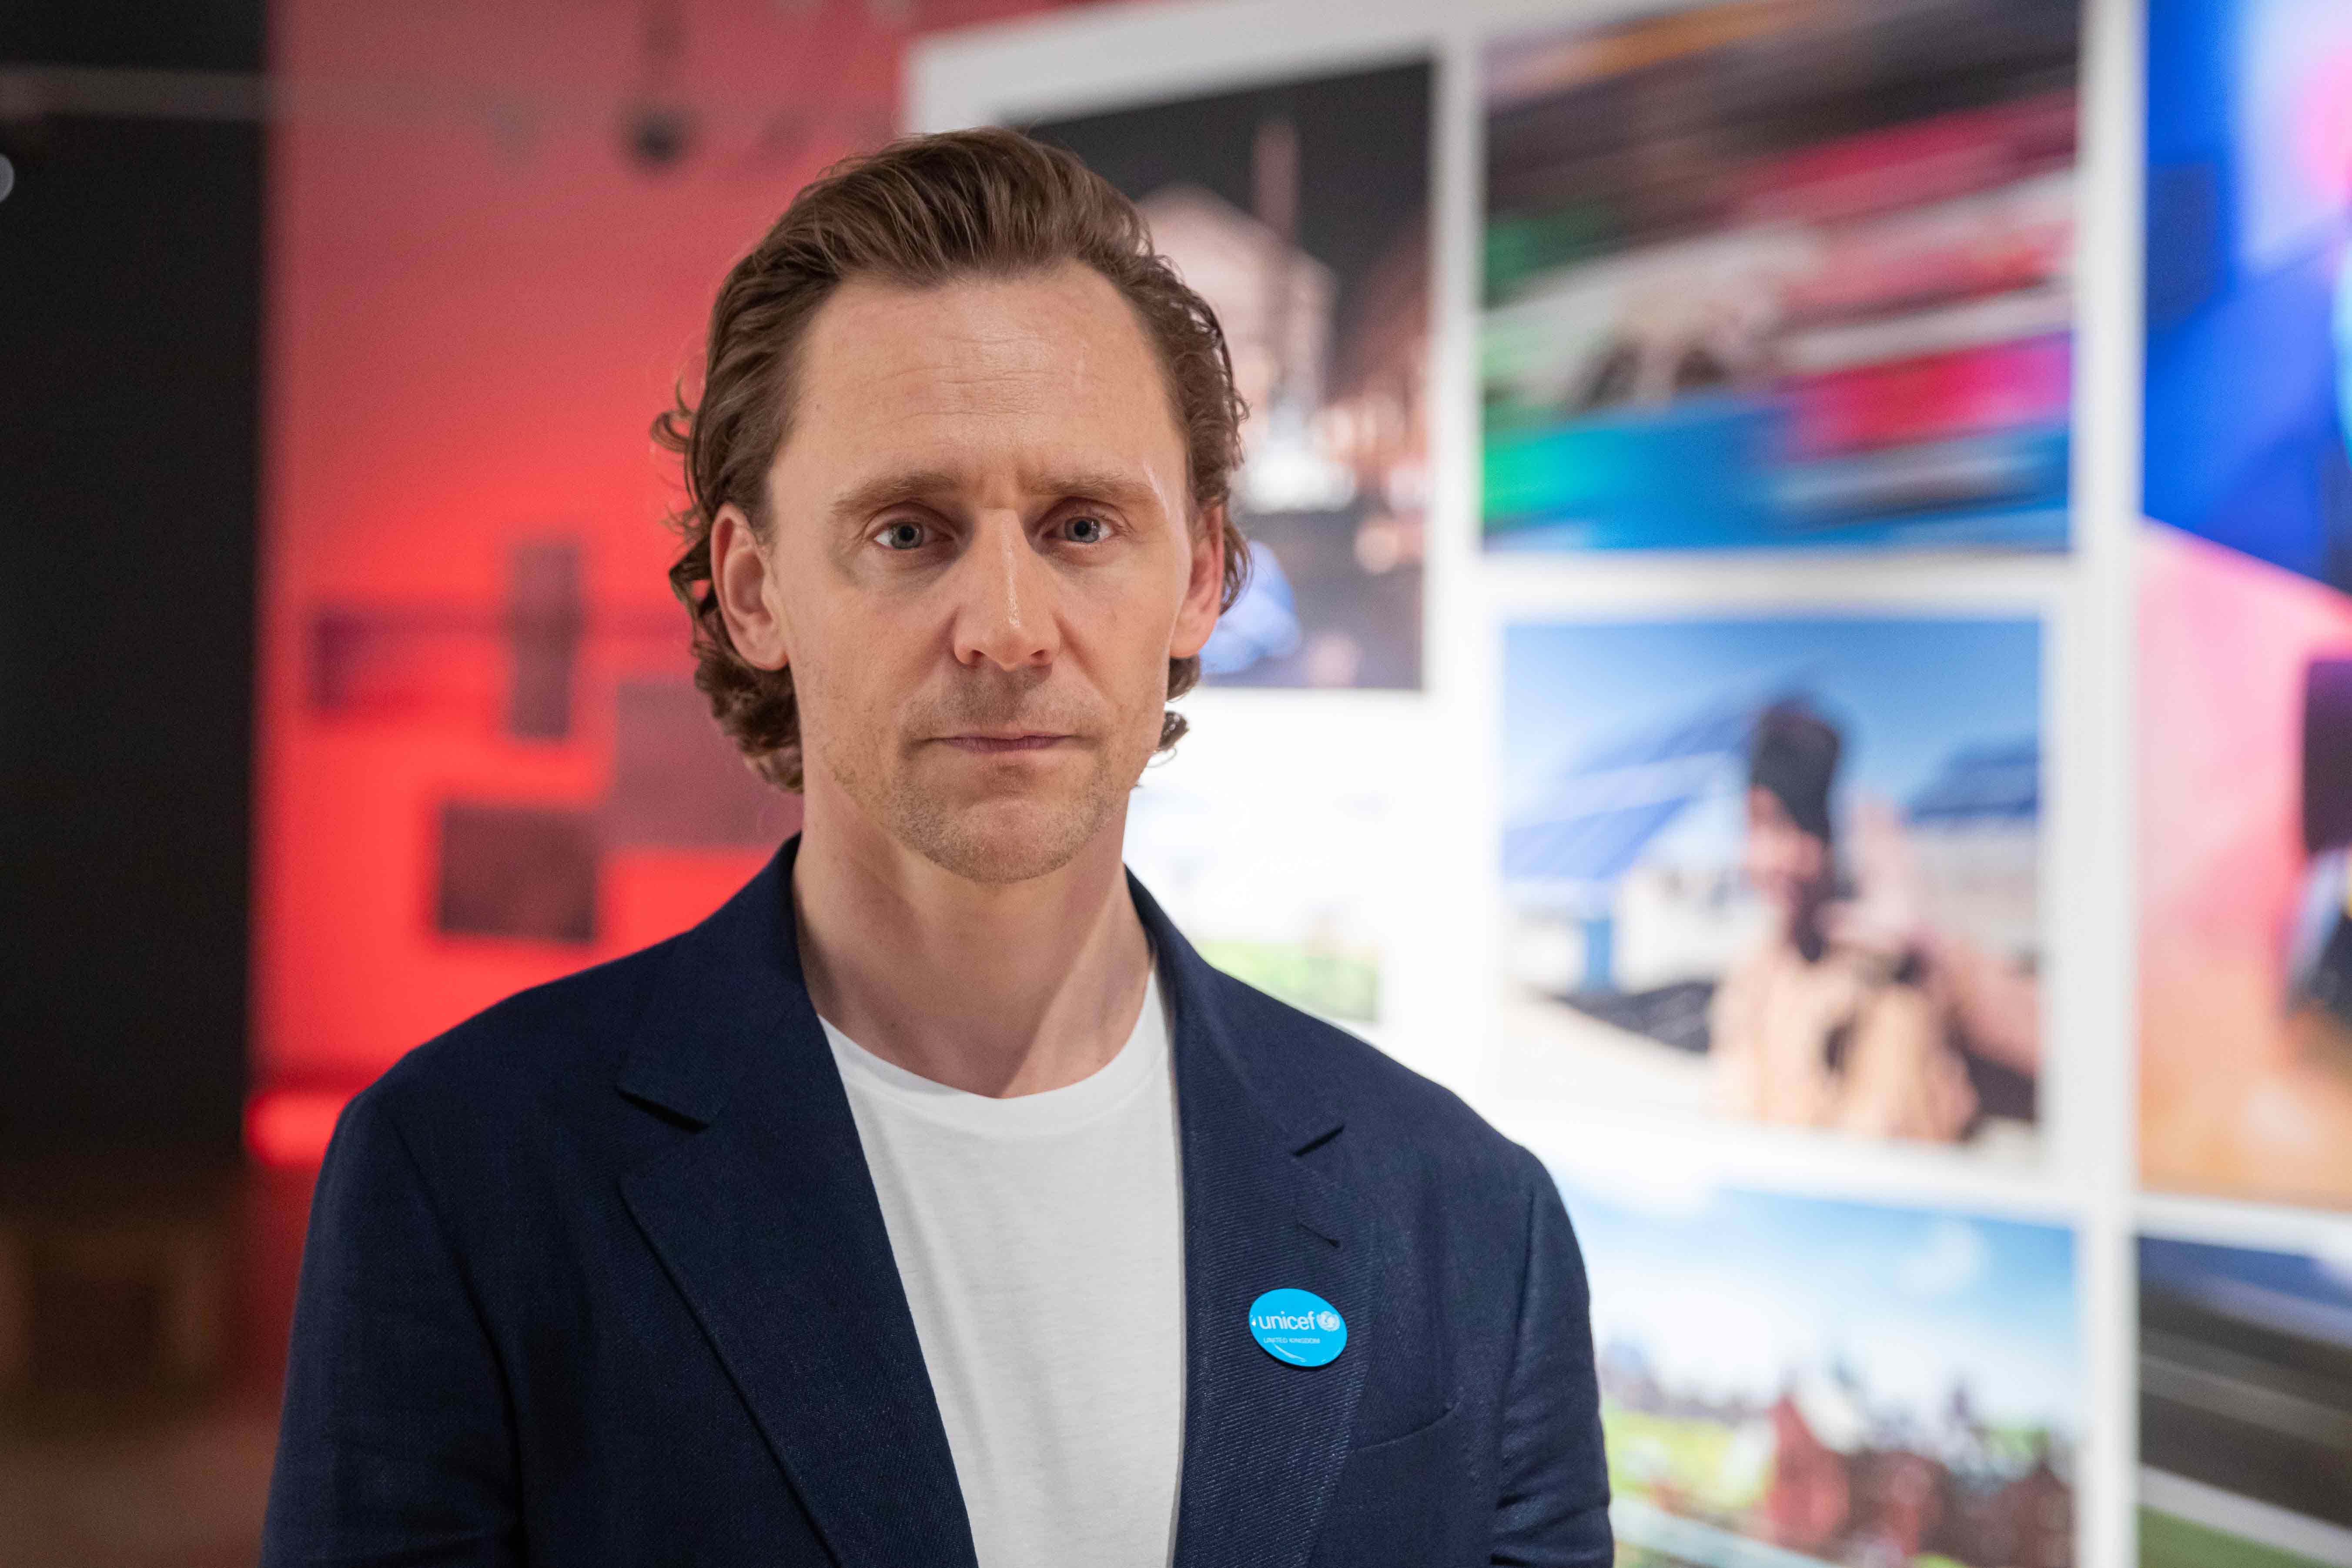 Formula E and UNICEF launch ‘Take a Breath’ campaign with Actor and UNICEF Ambassador Tom Hiddleston, highlighting the impact of air pollution on children